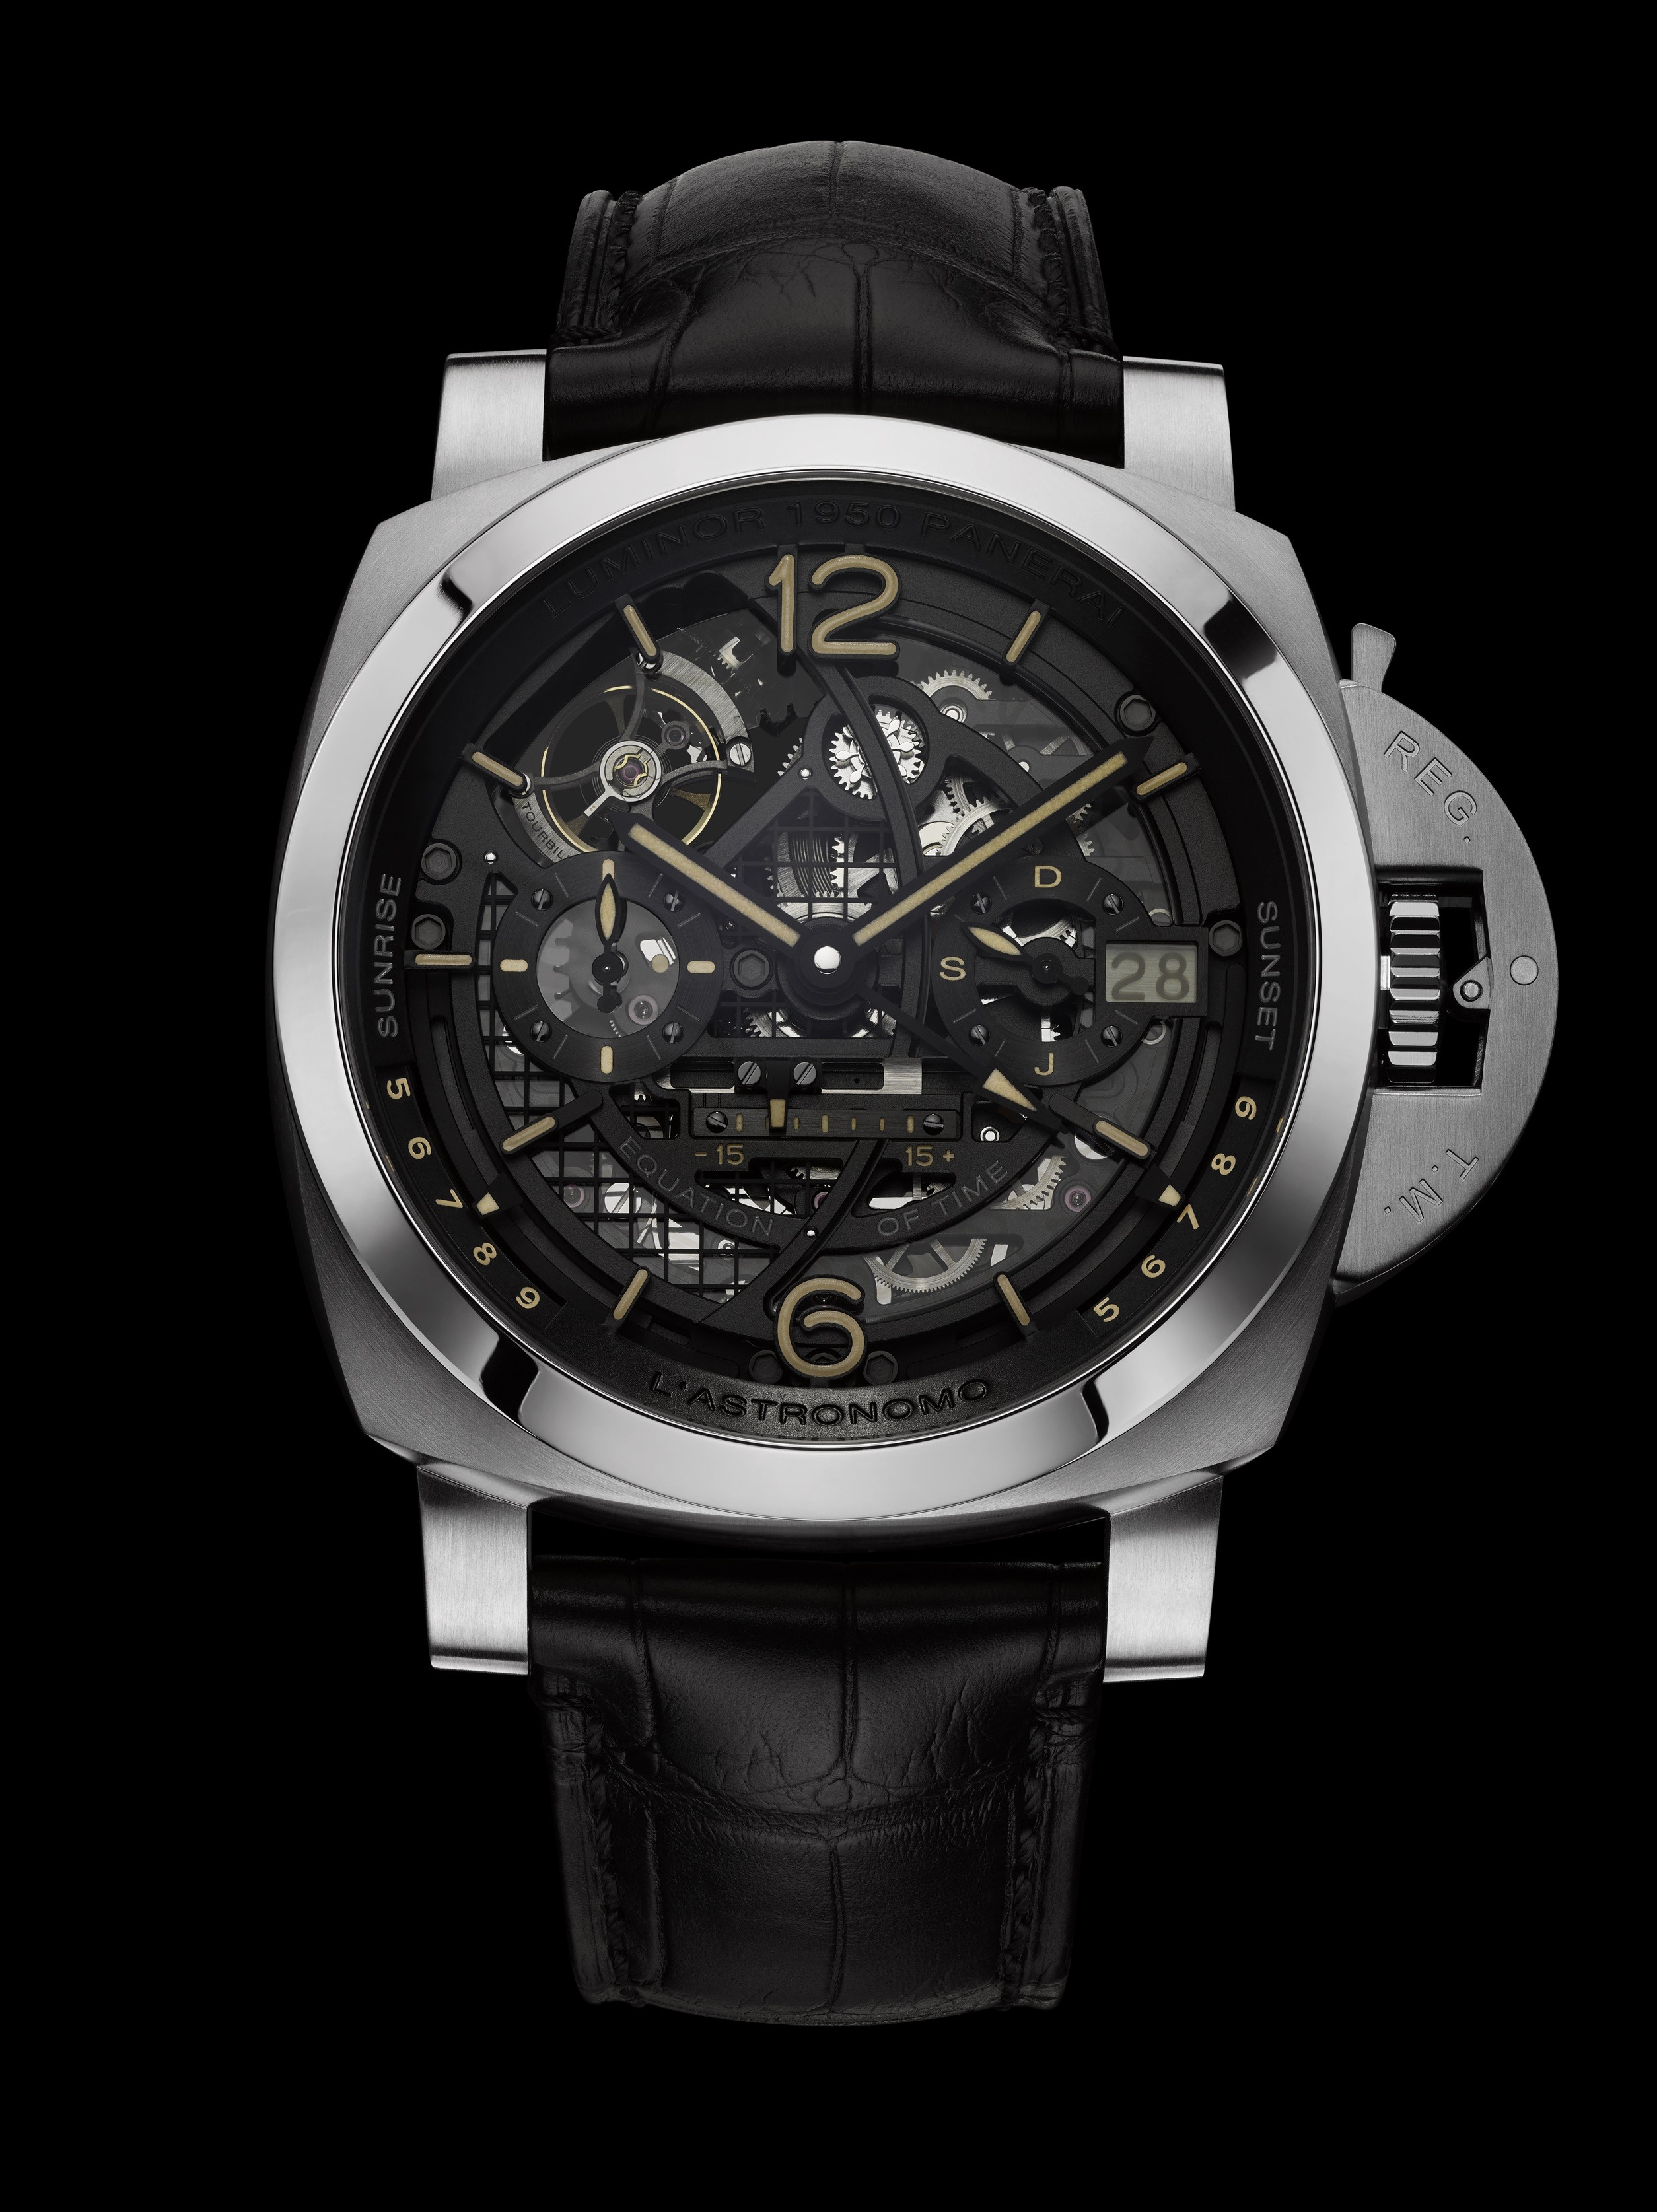 Panerai. Inspired by Galileo, the L’Astronomo – Luminor 1950 Tourbillon Moon Phases Equation of Time GMT Titanio is hand-wound with a P.2005/GLS calibre. Price on request